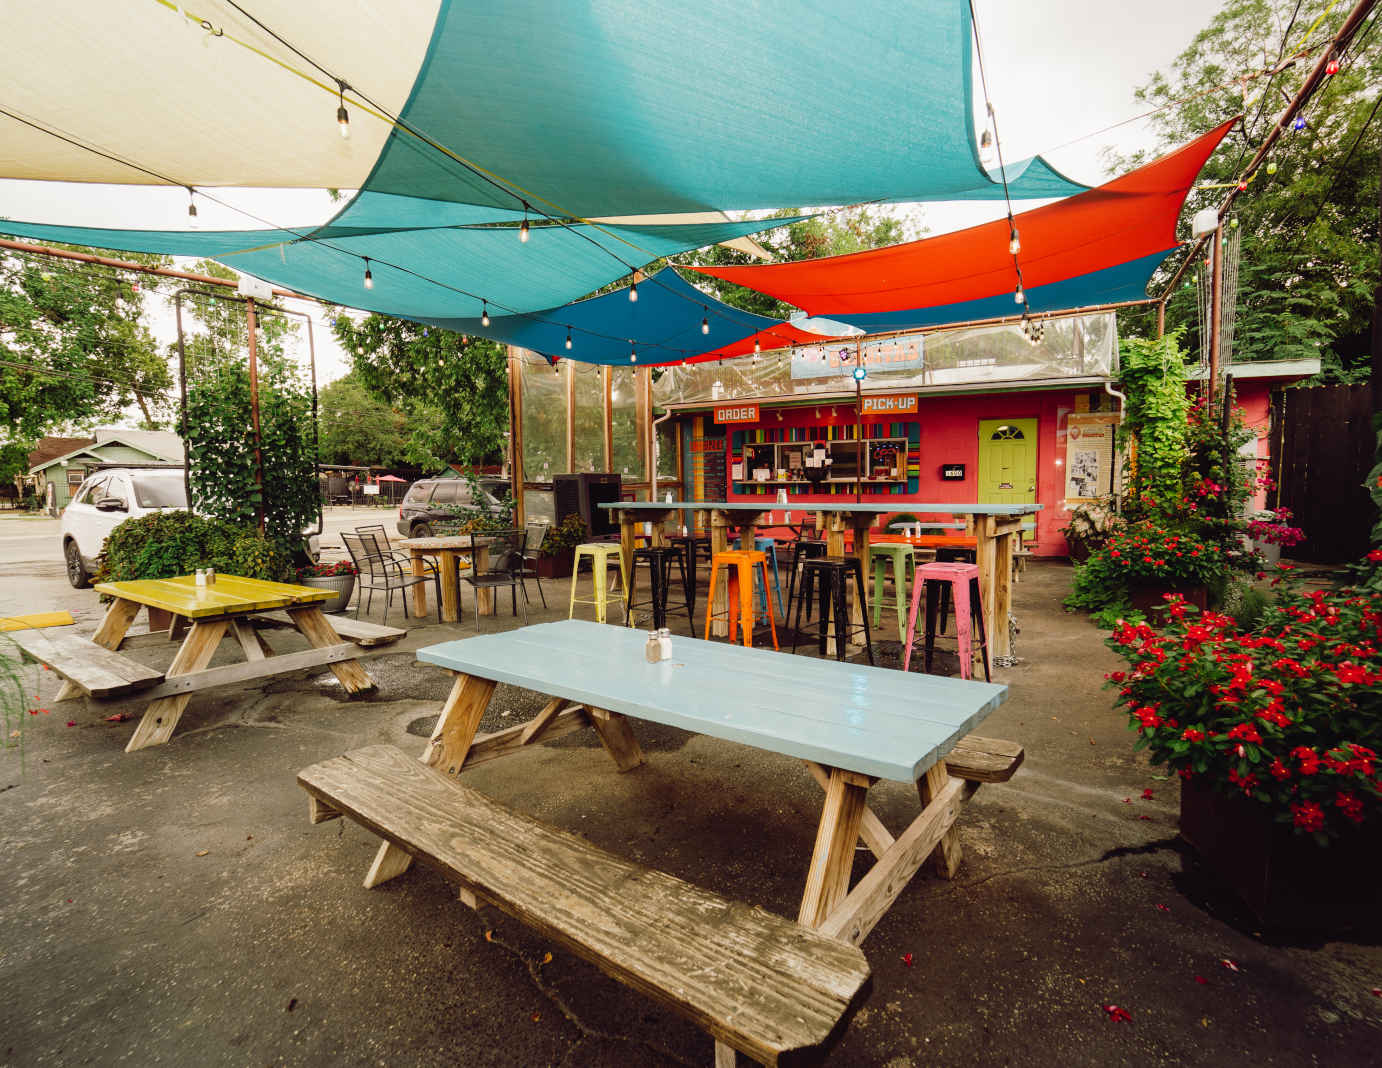 Outdoor seating area covered with sun shade sails